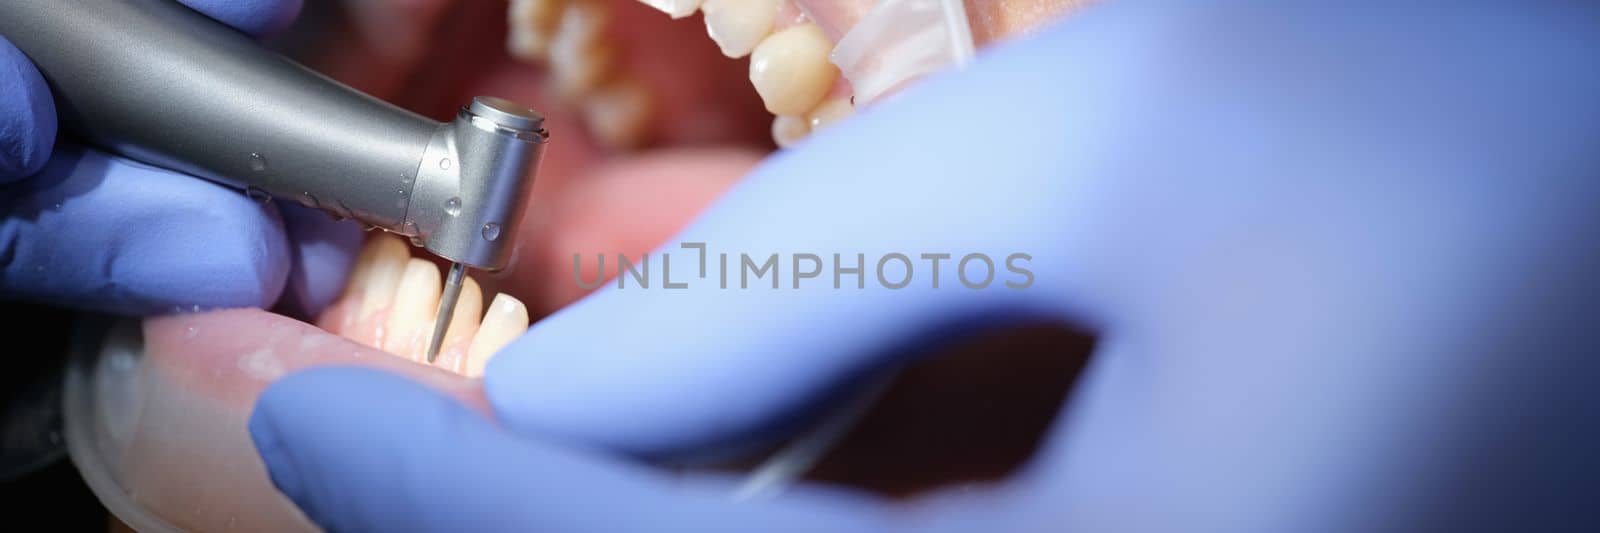 Dentist prepares woman teeth for the installation of ceramic veneers and crowns using drill by kuprevich